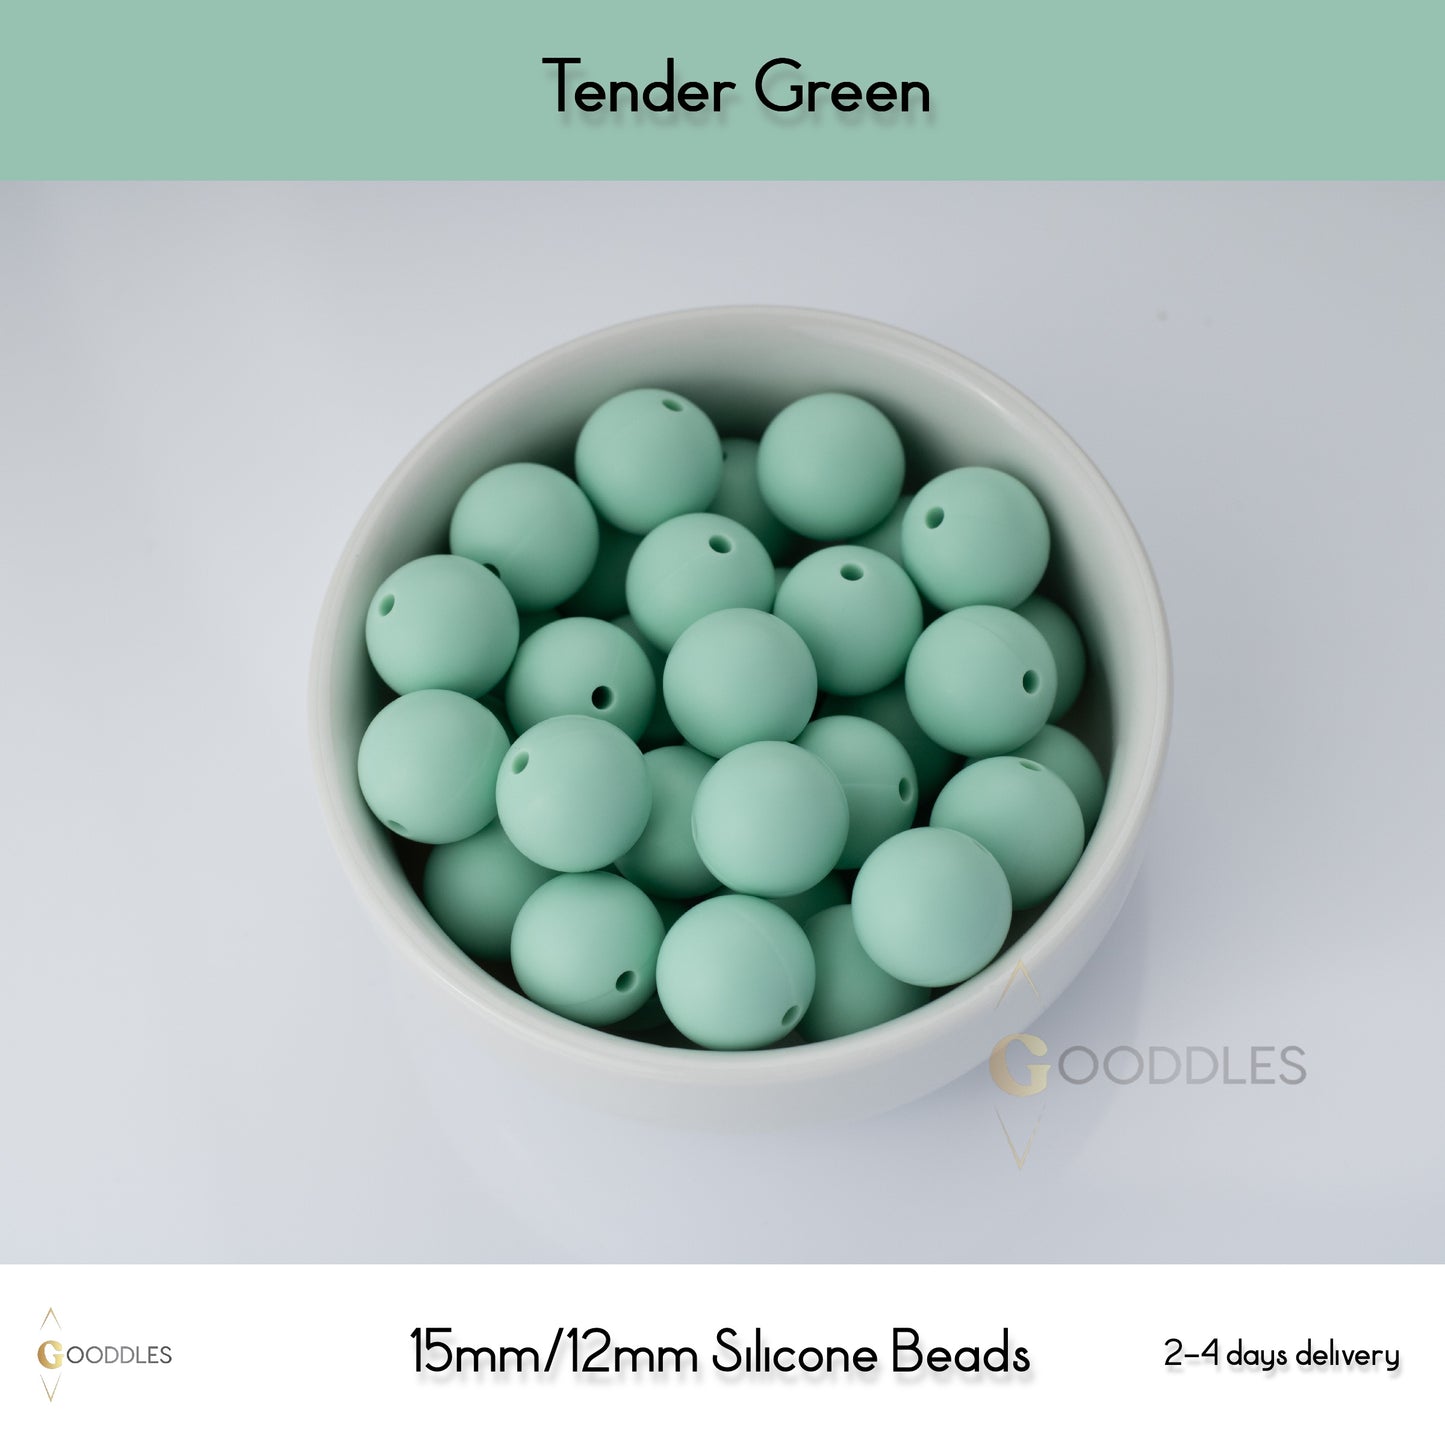 5pcs, Tender Green Silicone Beads Round Silicone Beads